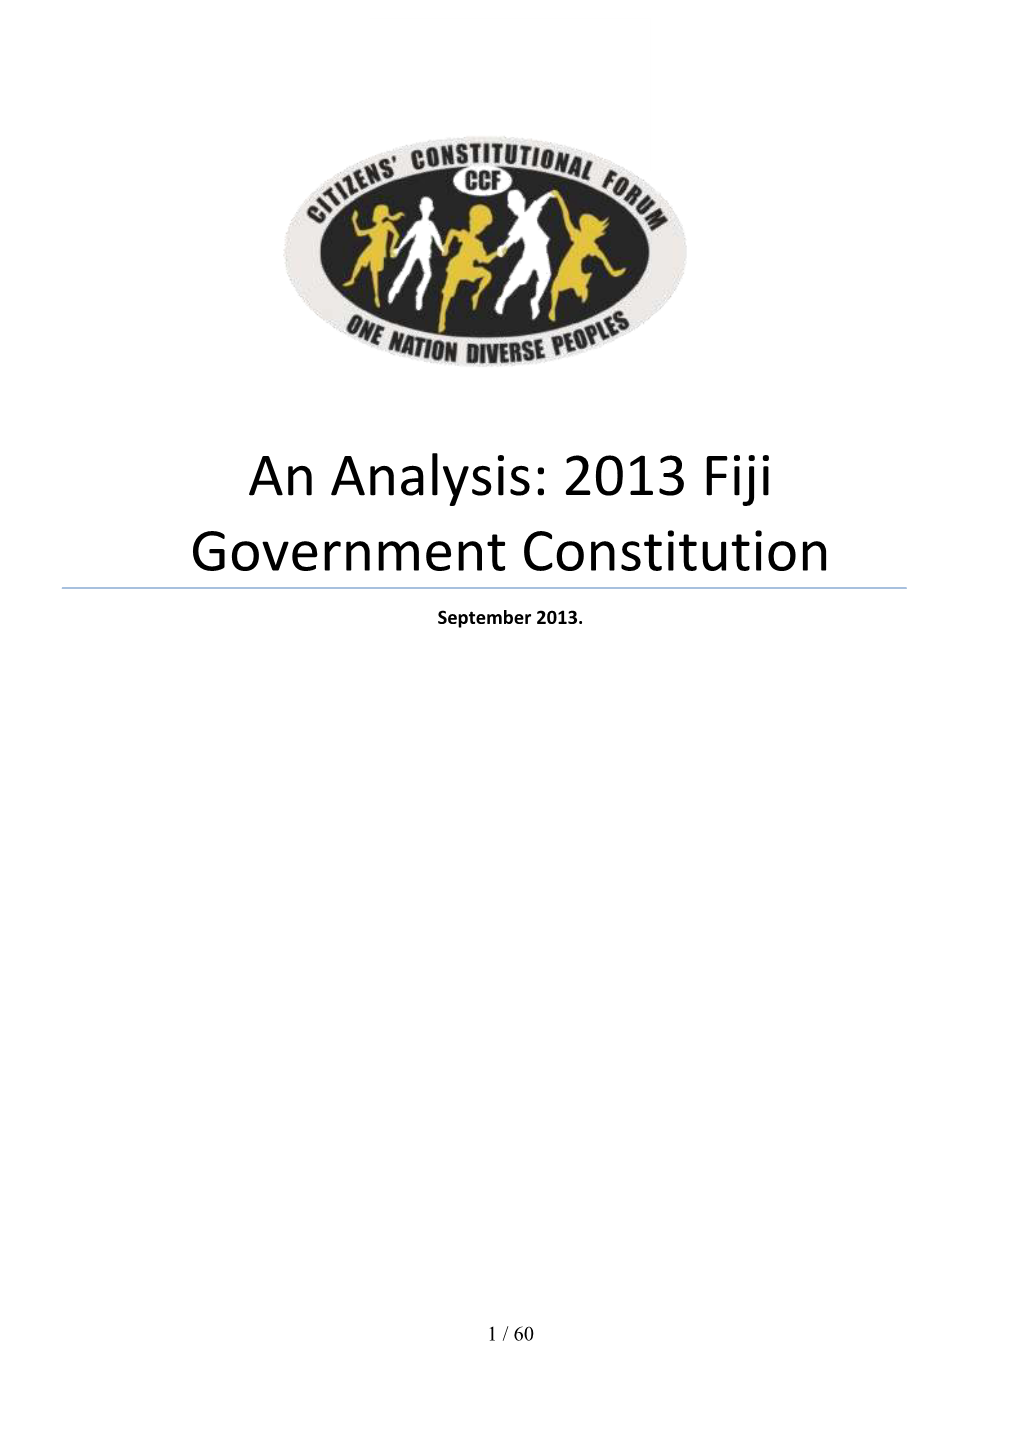 An Analysis: 2013 Fiji Government Constitution”, Is the Only Version of Citizens’ Constitutional Forum (“CCF”) Analysis on the 2013 Fiji Government Constitution